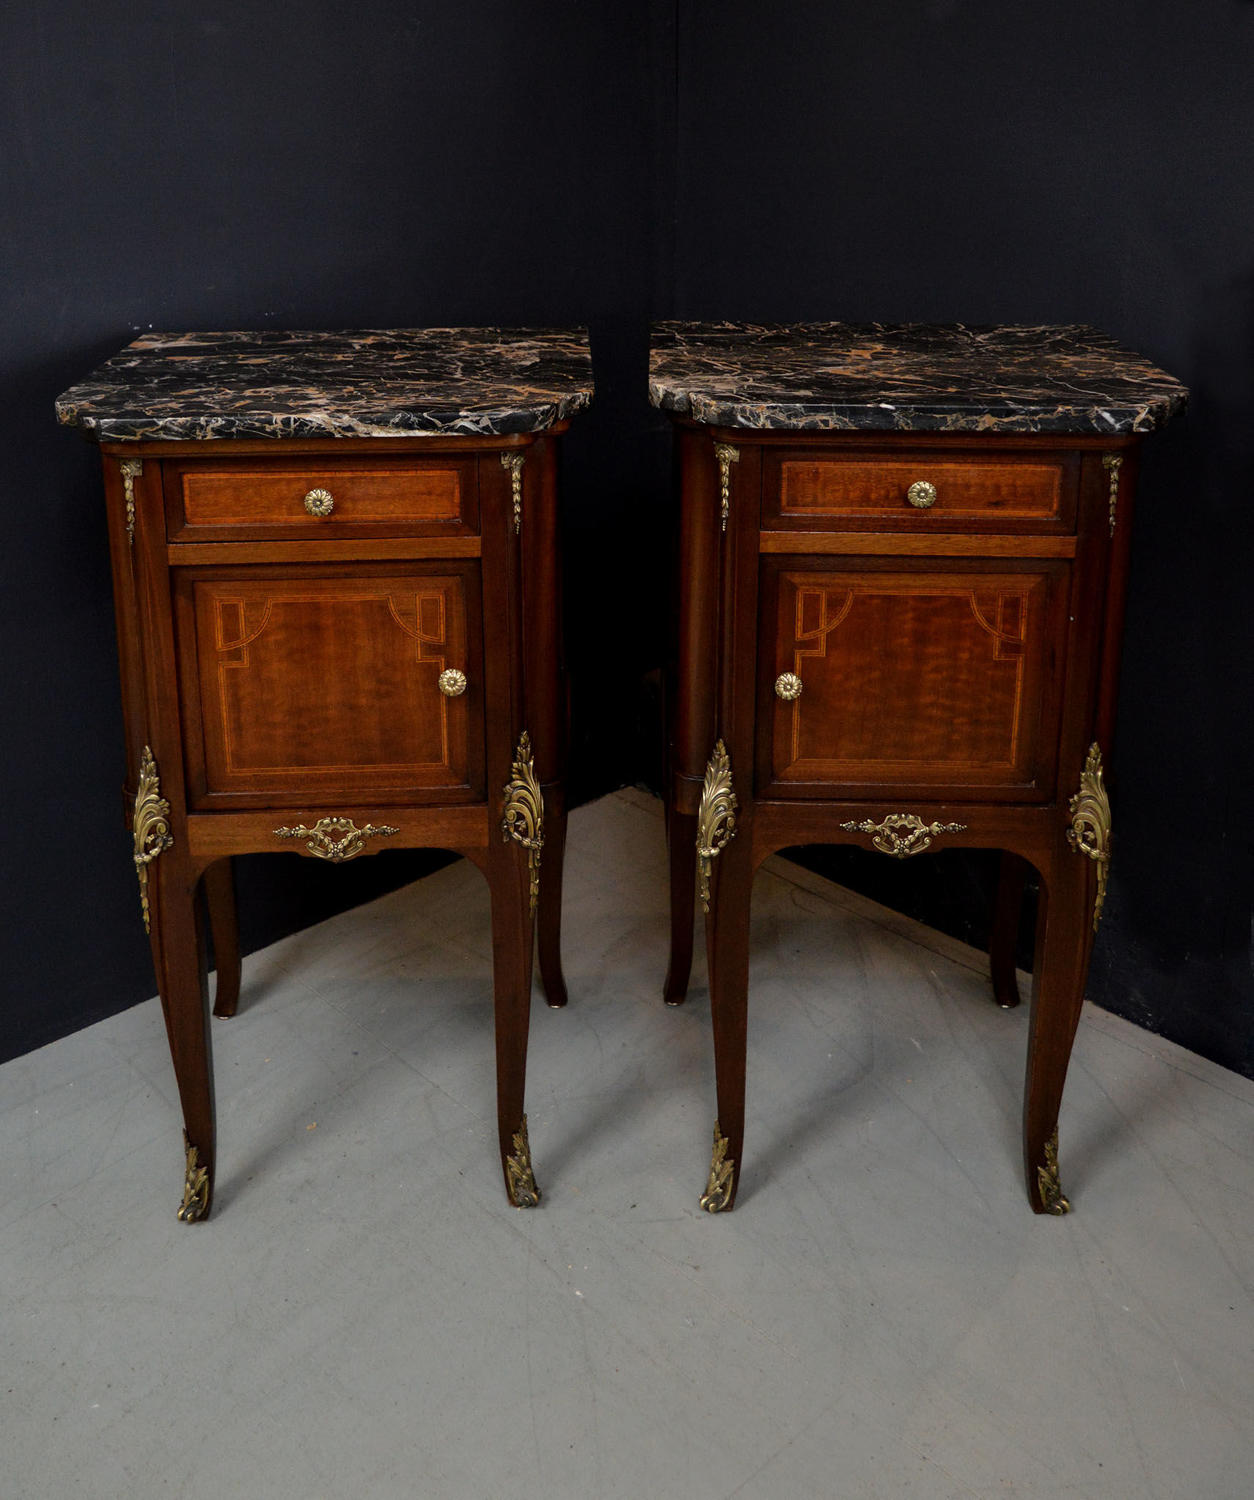 Pair of Mahogany Louis XVI style Bedside Cabinets